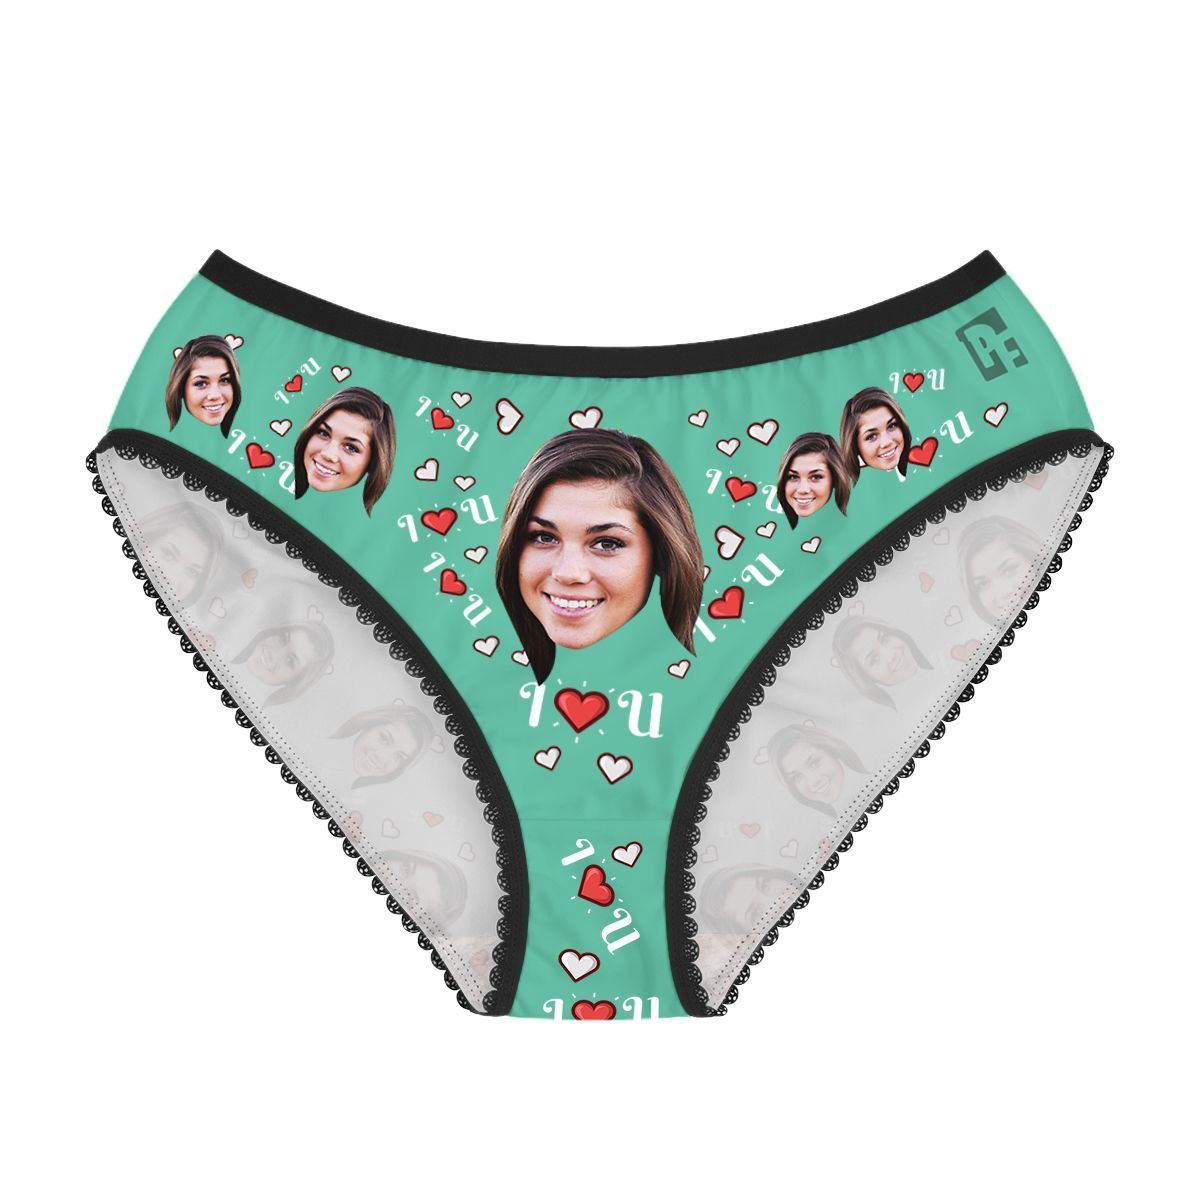 Mint I <3 You women's underwear briefs personalized with photo printed on them